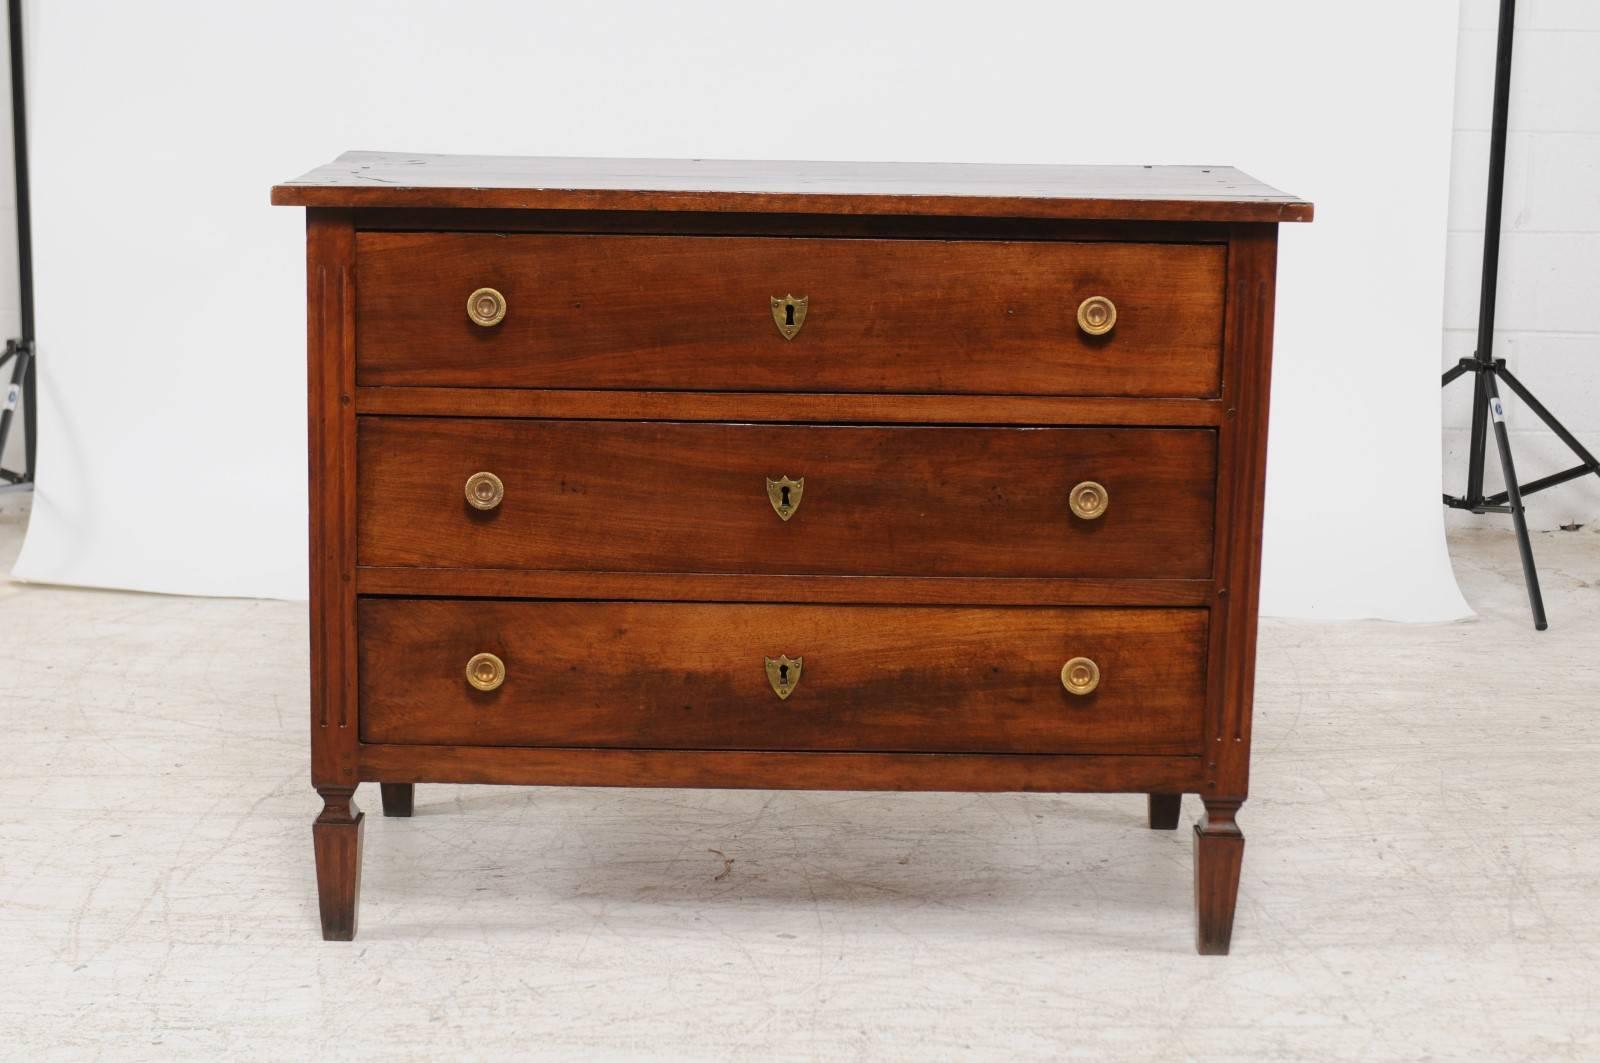 An Italian neoclassical walnut three-drawer commode with tapered legs from the early 19th century. This Italian wooden chest-of-drawers features a rectangular planked top sitting above three dovetailed drawers. Each drawer is simply adorned with